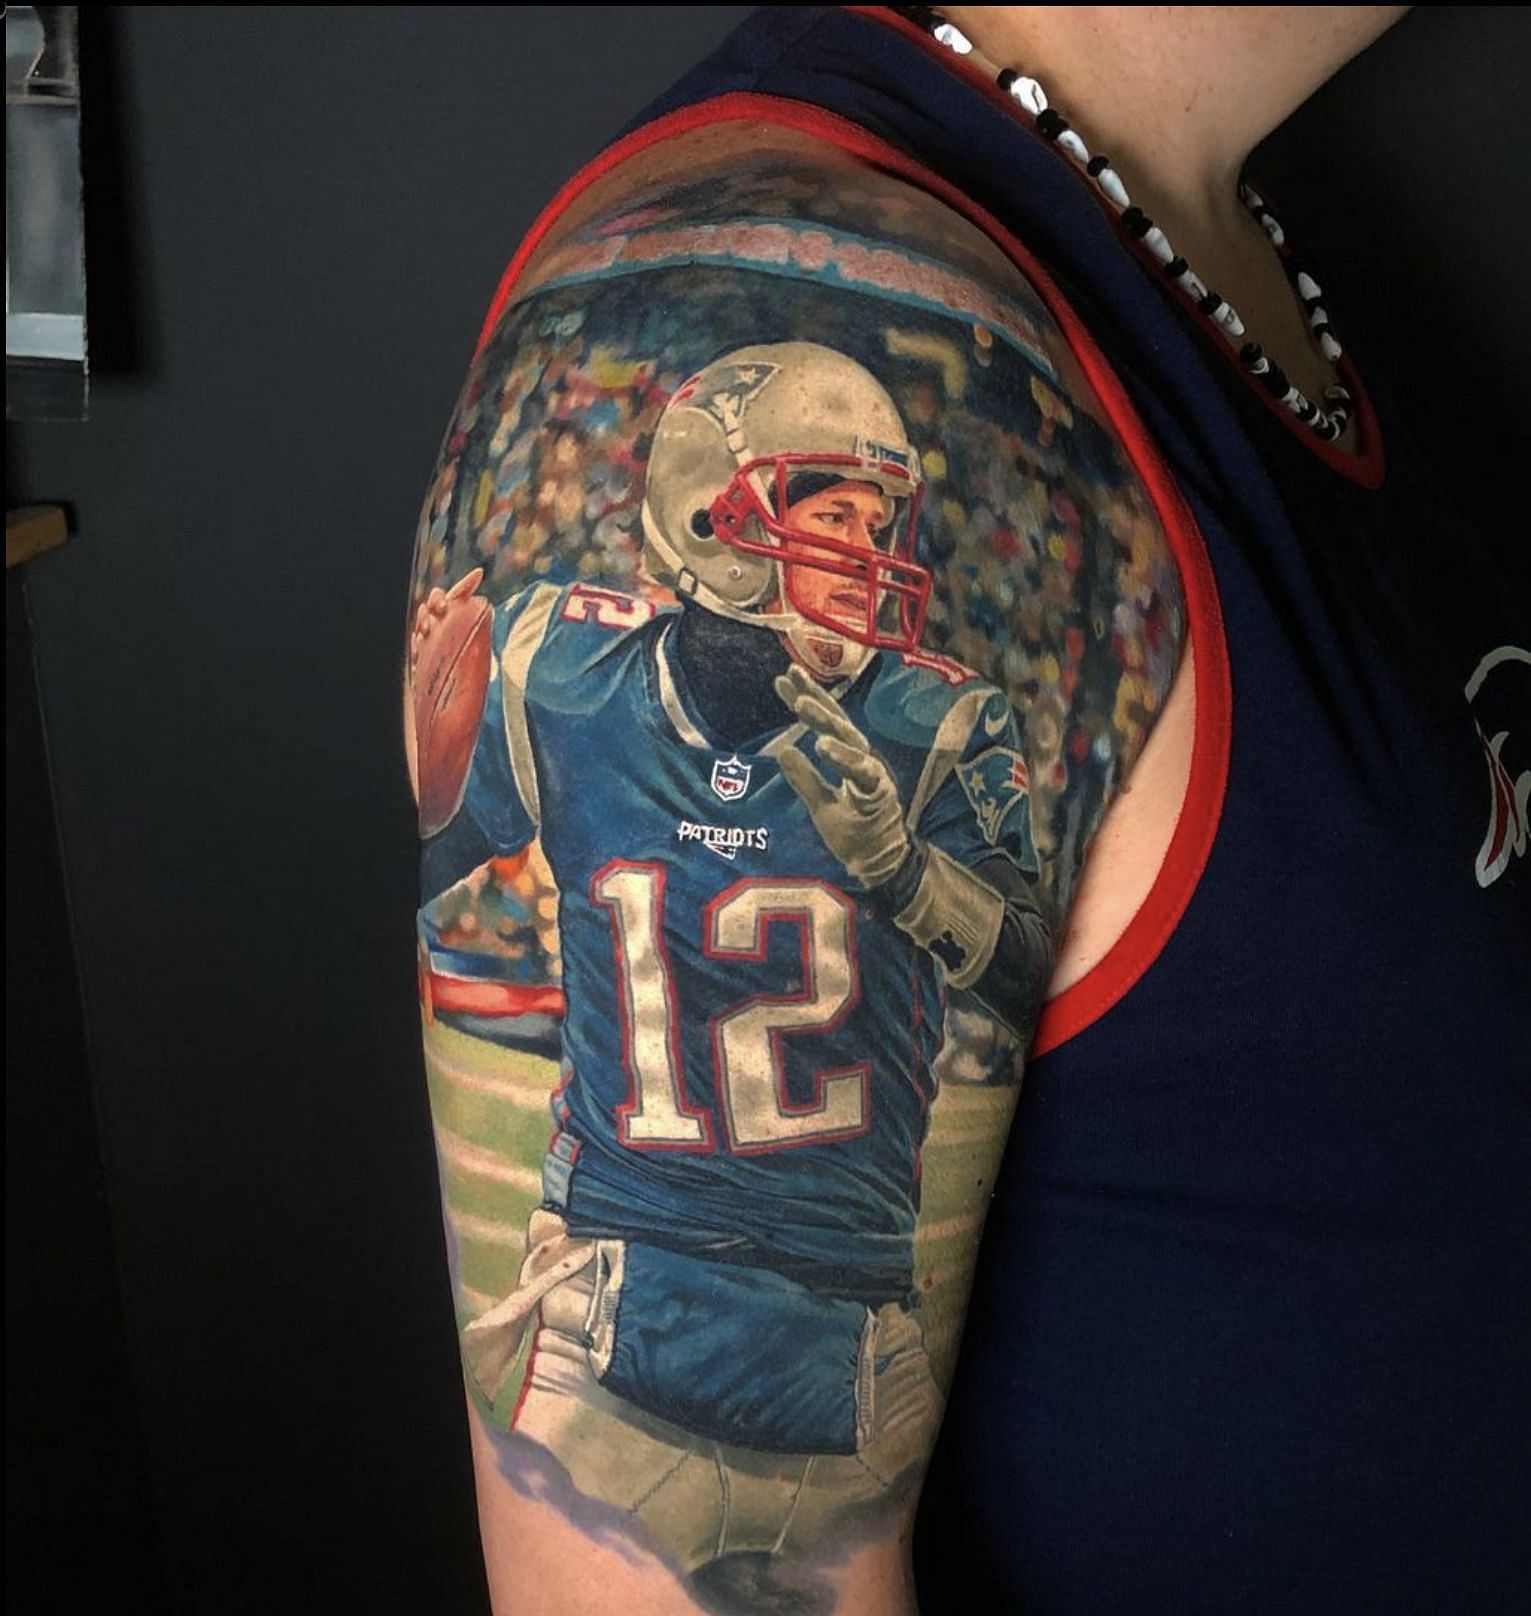 A fan with very detailed ink with Brady during his time with the Patriots. Source: ors_bloodyhands (IG)